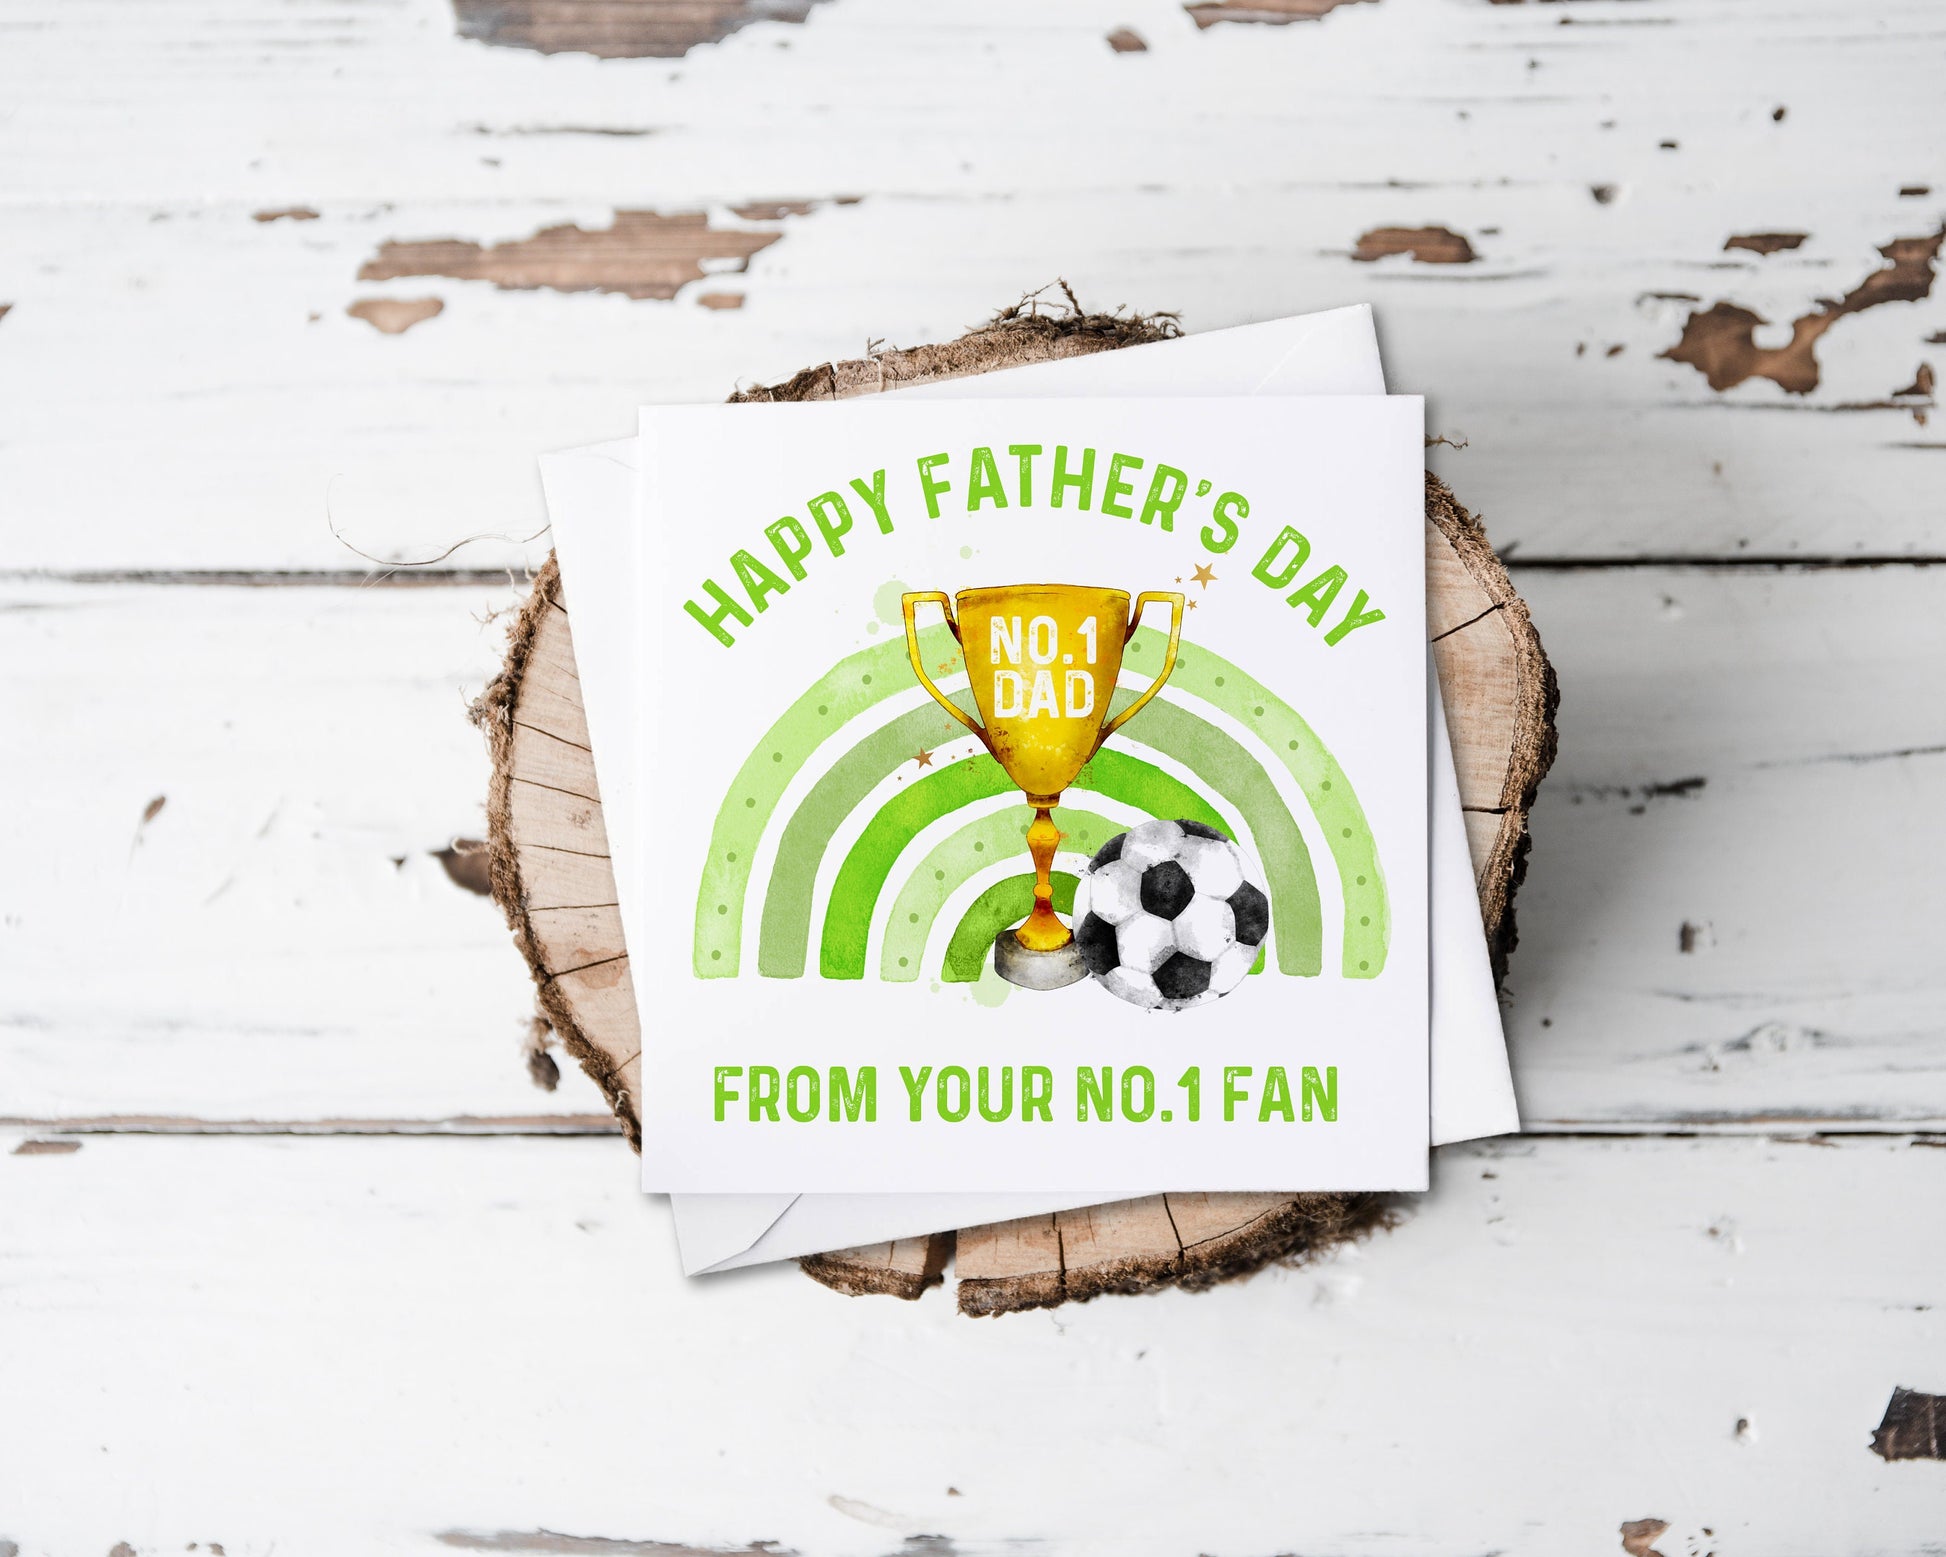 Father's day greeting card, the design features a trophy, a green rainbow and a football, text reads 'Happy Father's Day from your no.1 fan'